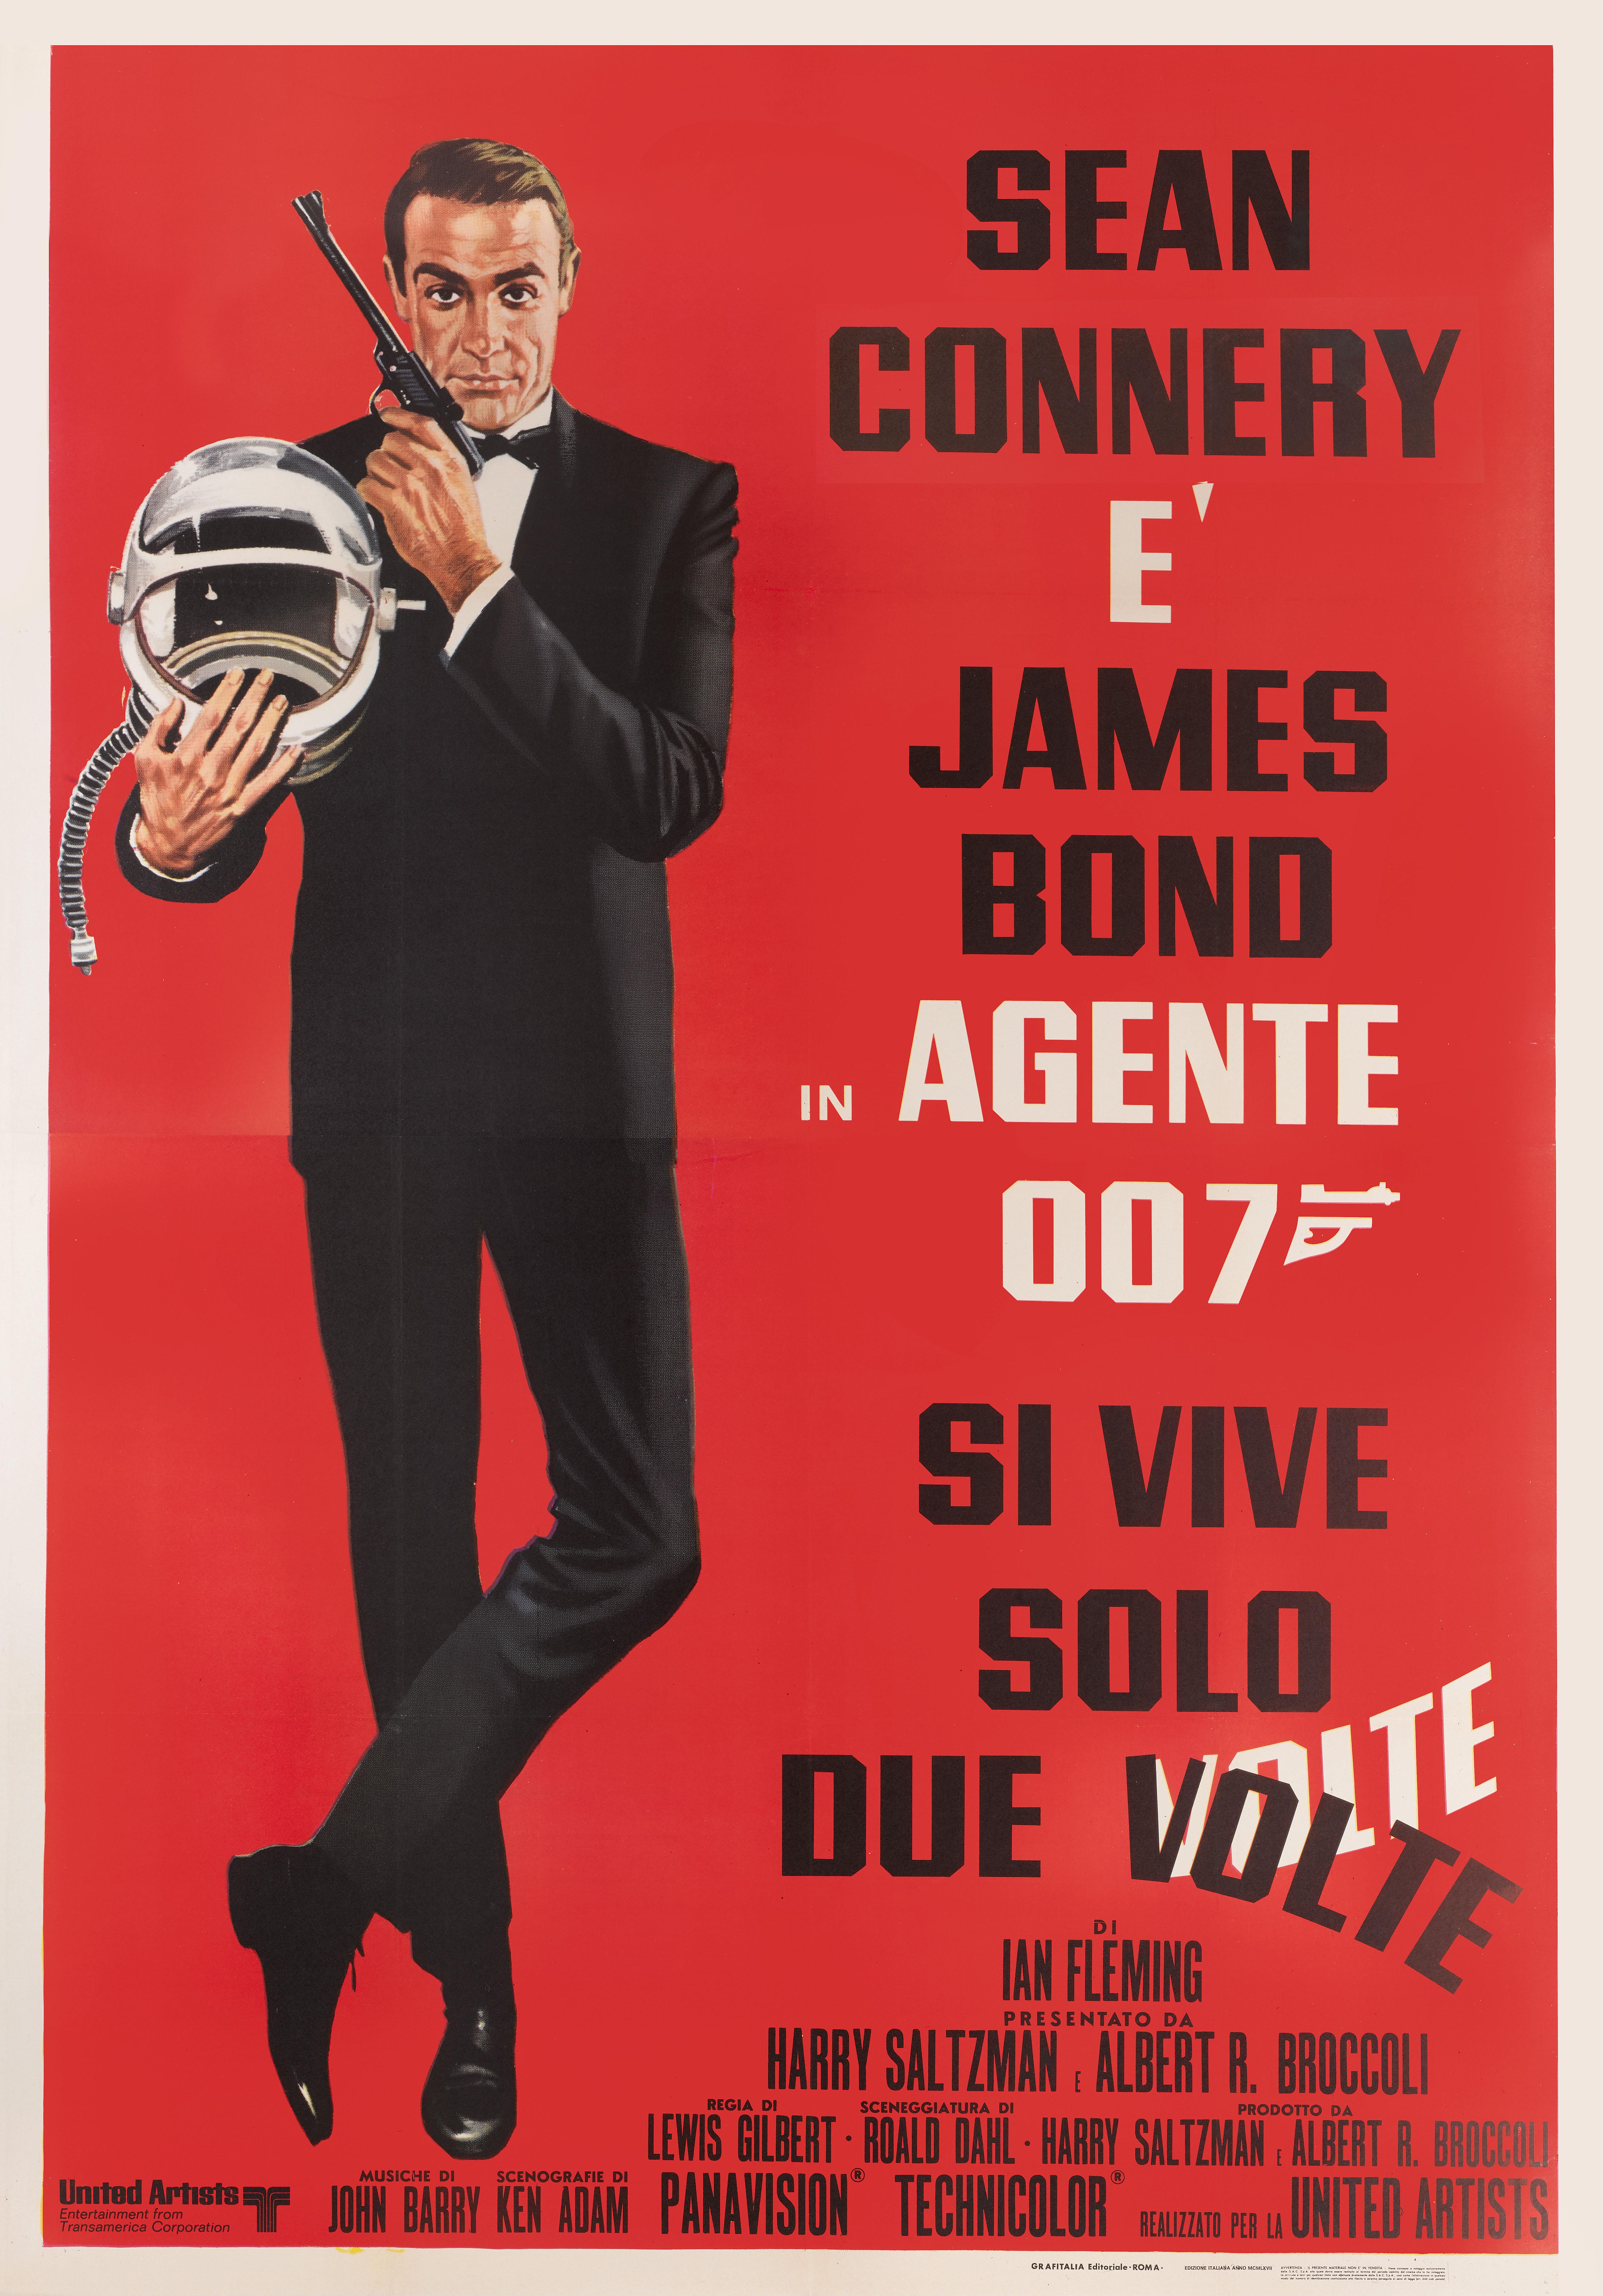 Original Italian film poster for Sean Connery's 5th staring role as James Bond
In You Only Live Twice.
This poster is from the films 1971 re-release. The art work is by Otello Mauro Innocenti 'Maro' (1927-2003) 

This poster is conservation linen